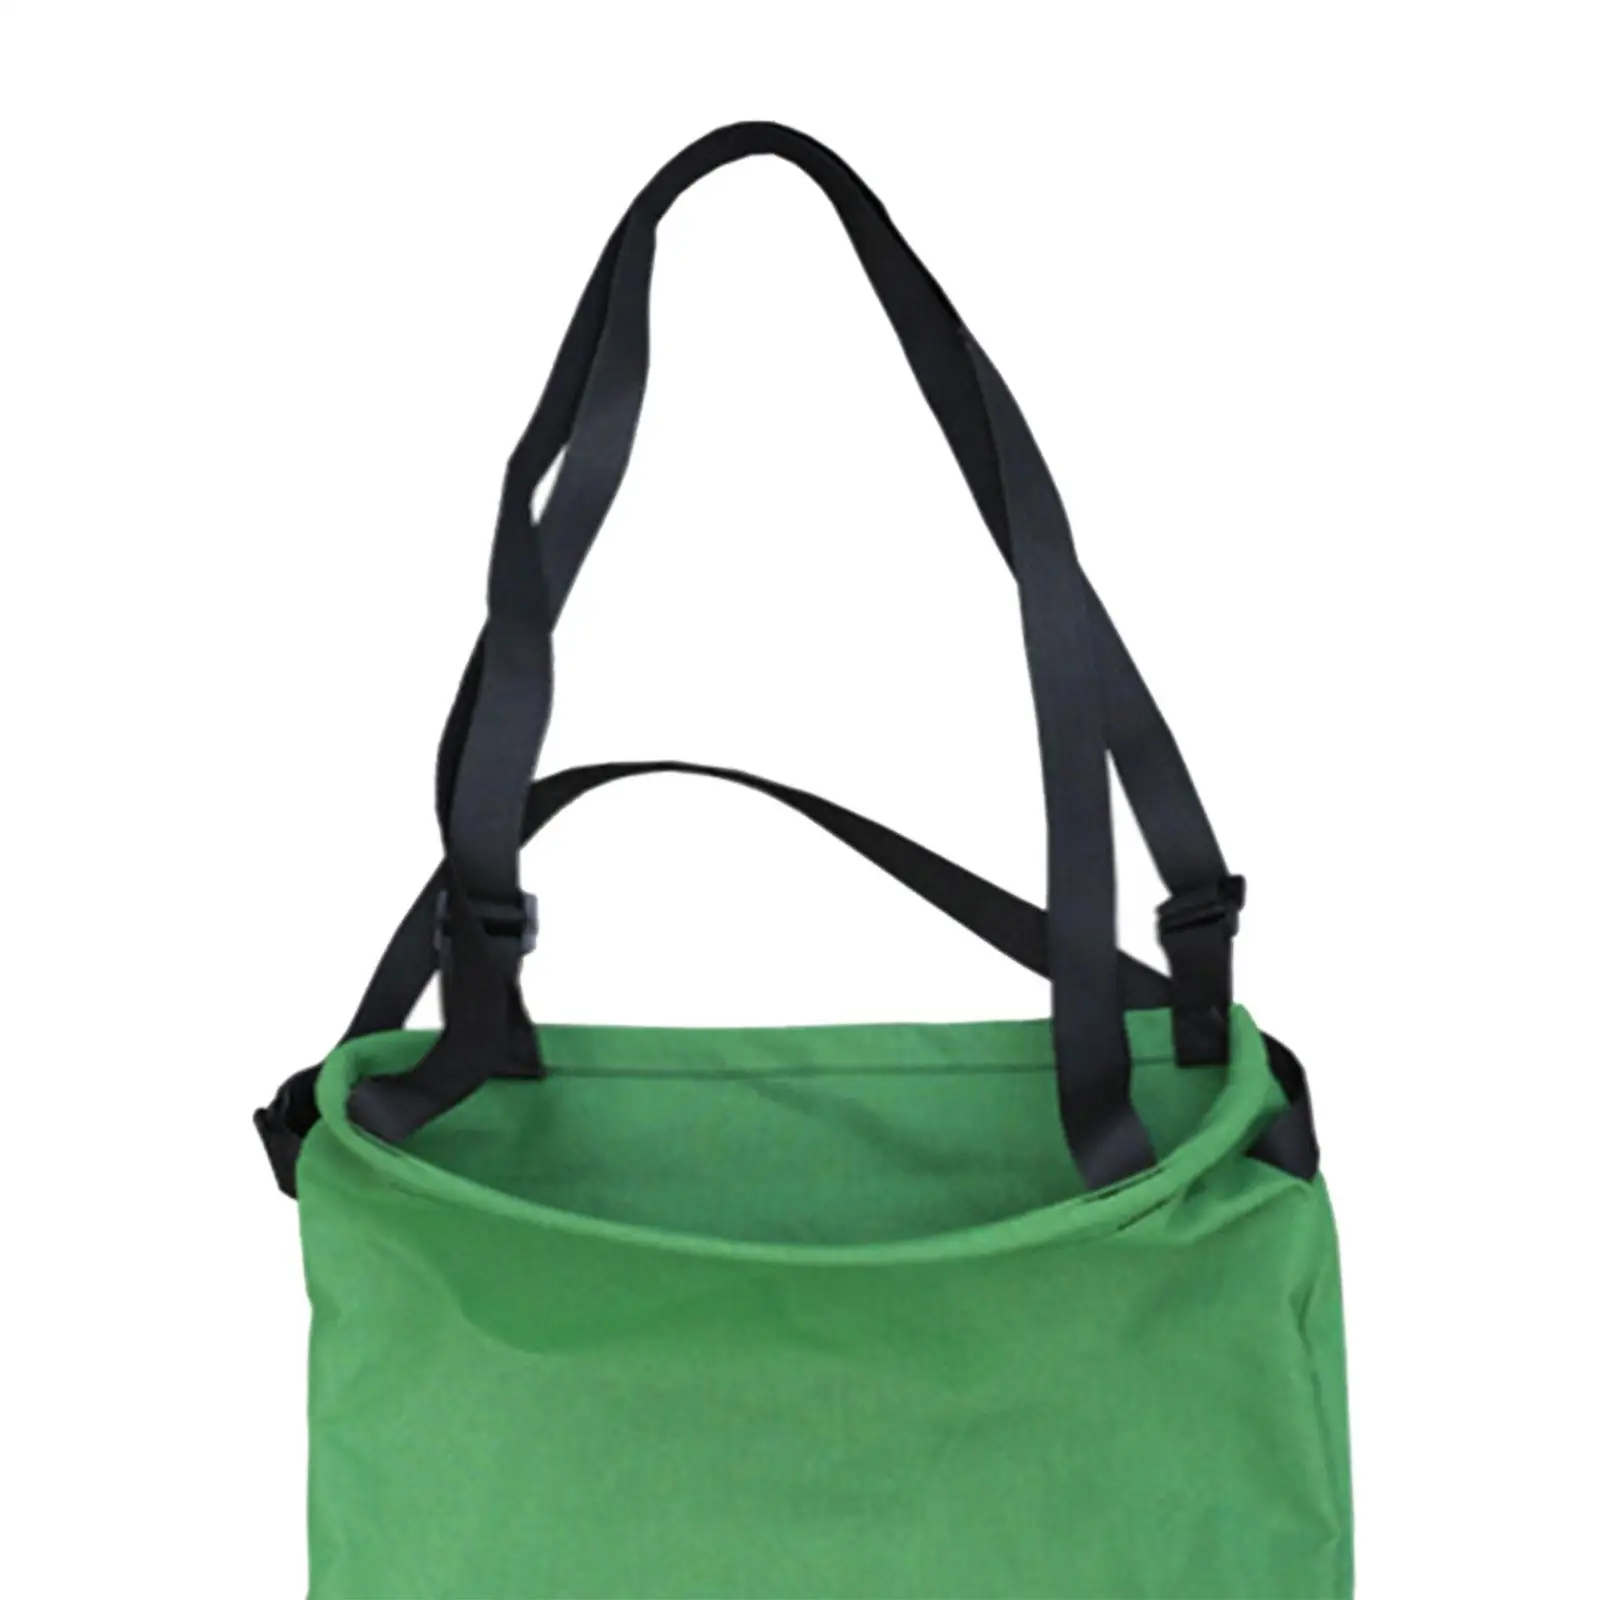 Fruit Picking Bag Large Multifunction Free Your Arm and Hand Garden Apron Picking Bag for Weeding Orchard Fruit Outdoor